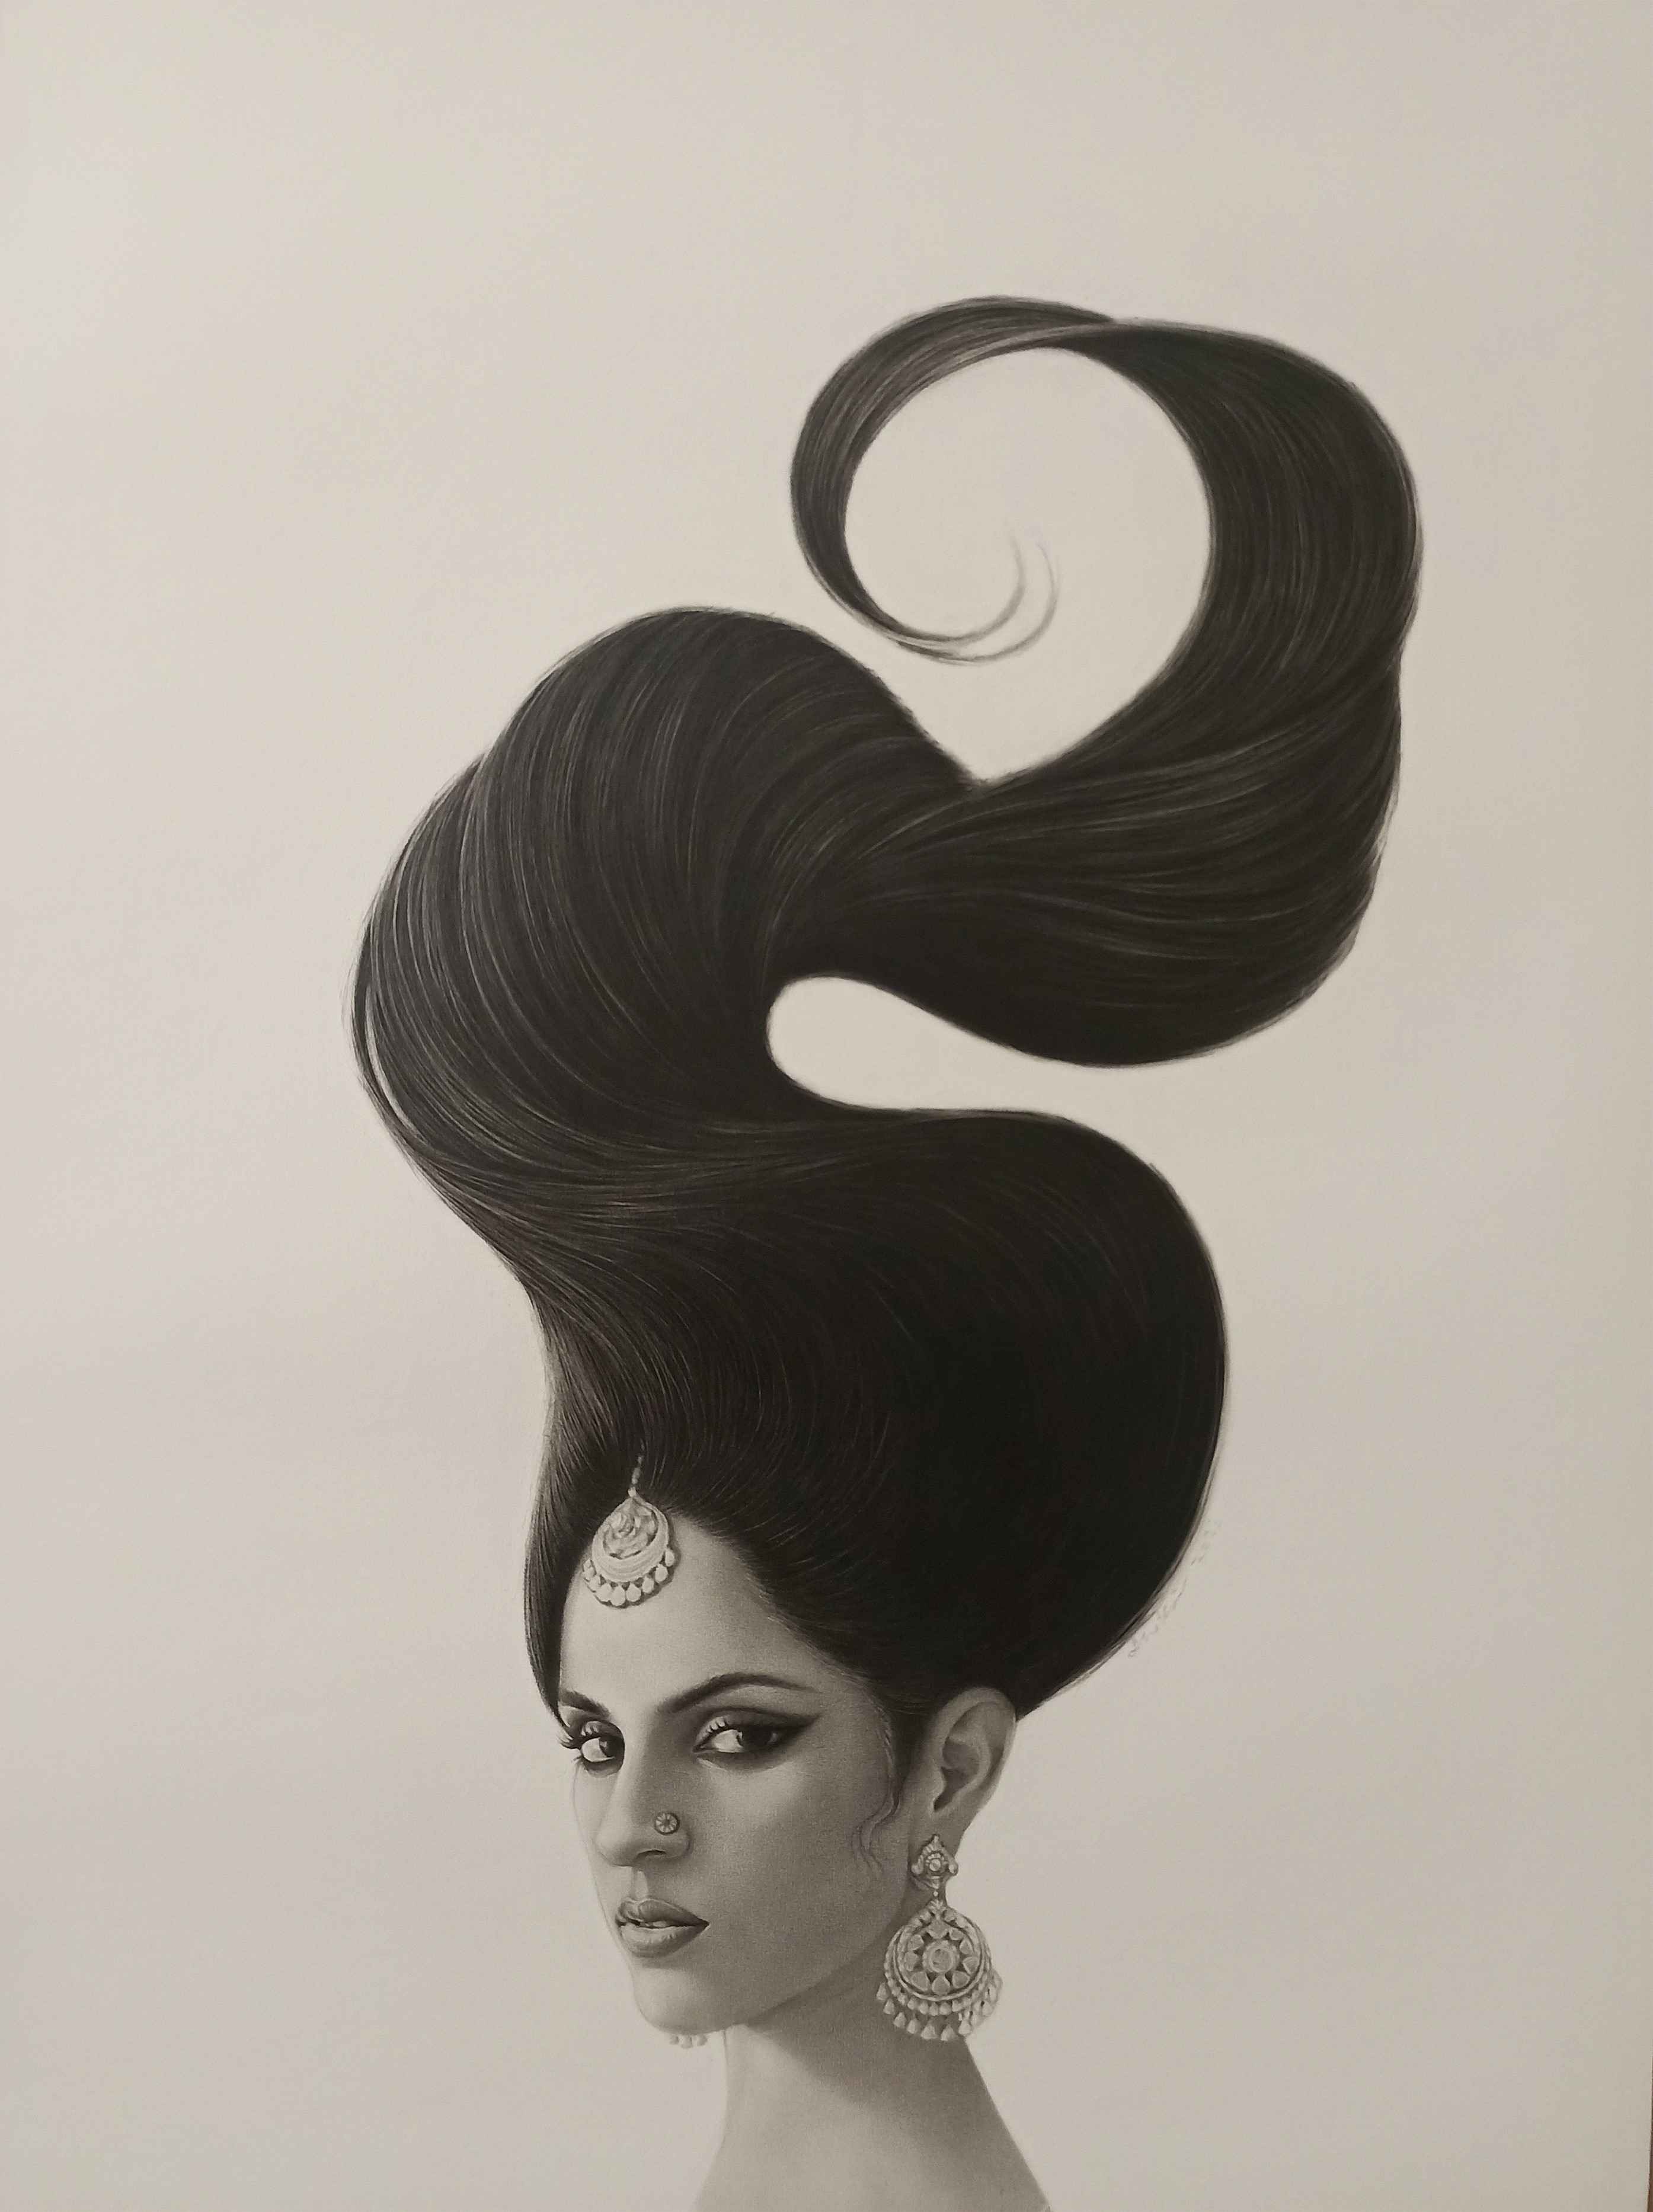 Title: UNTITLED 04<br> Medium: Graphite andCharcoal on paper<br> Size: 43x30 inches